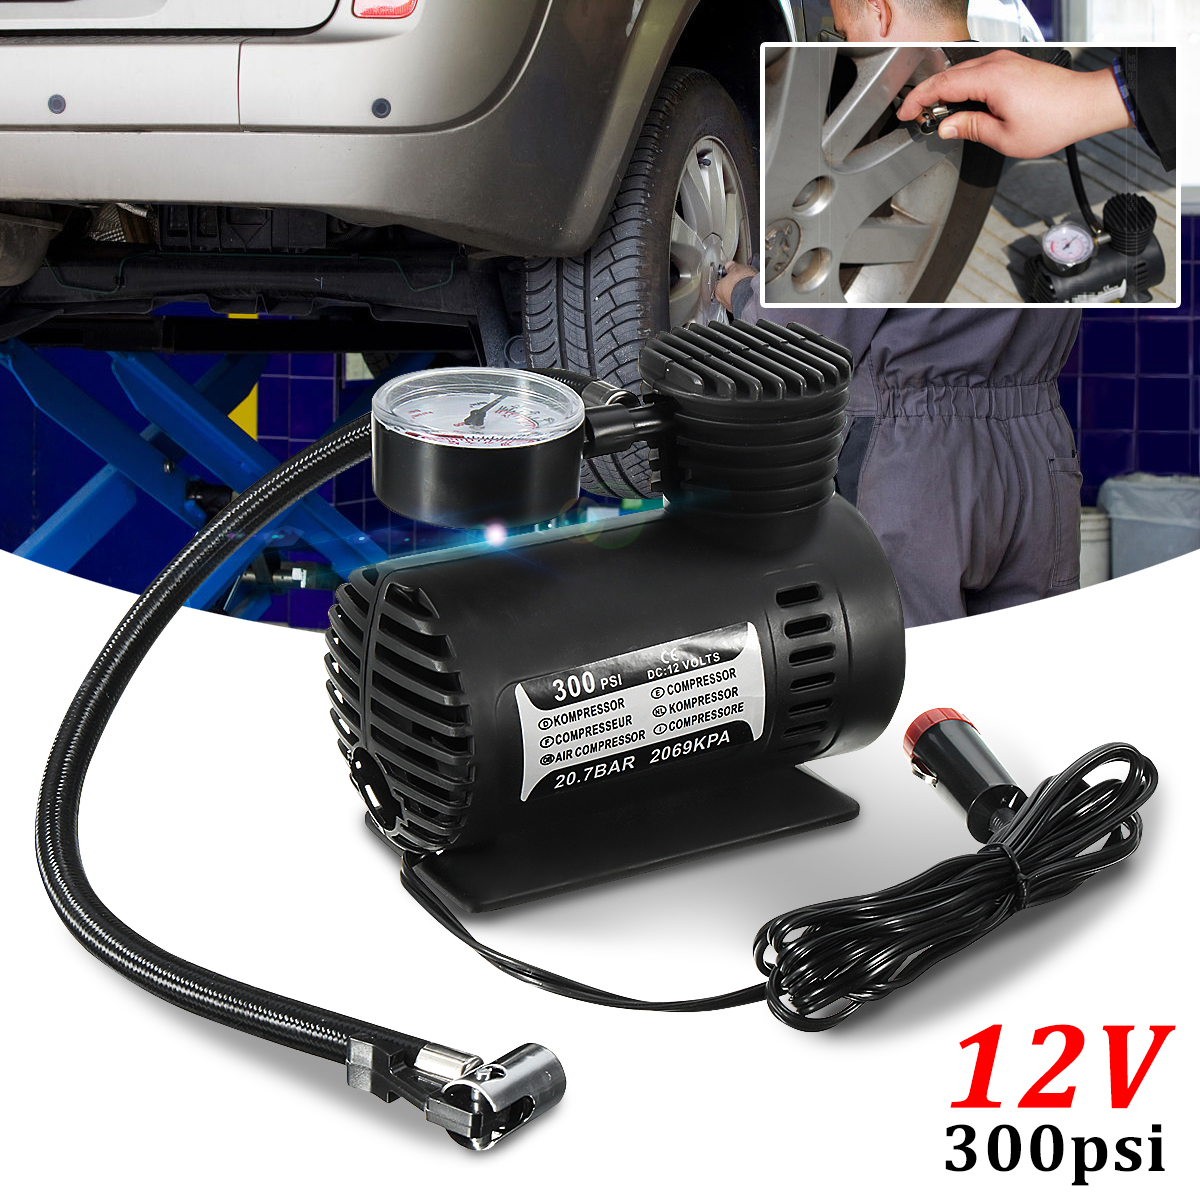 DC-12V-300PSI-Car-Air-Compressor-Portable-Tire-Inflator-Air-Pump-For-Motorcycle-Car-Auto-Bicycle-1715750-1